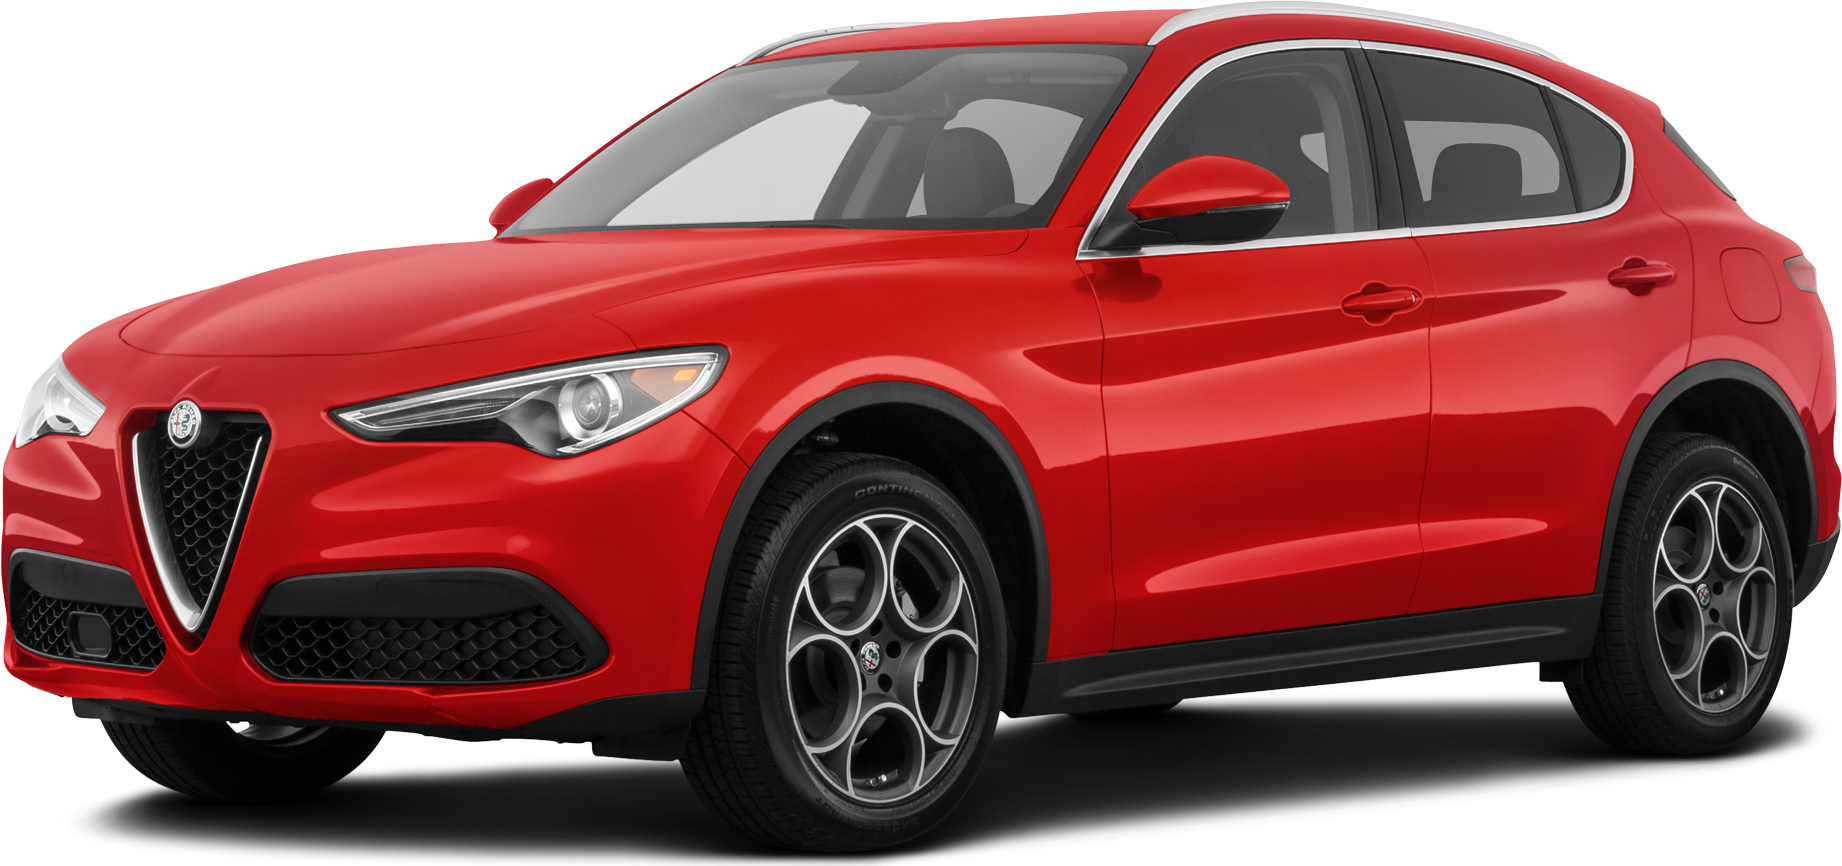 Alfa Romeo Cars and SUVs: Latest Prices, Reviews, Specs and Photos